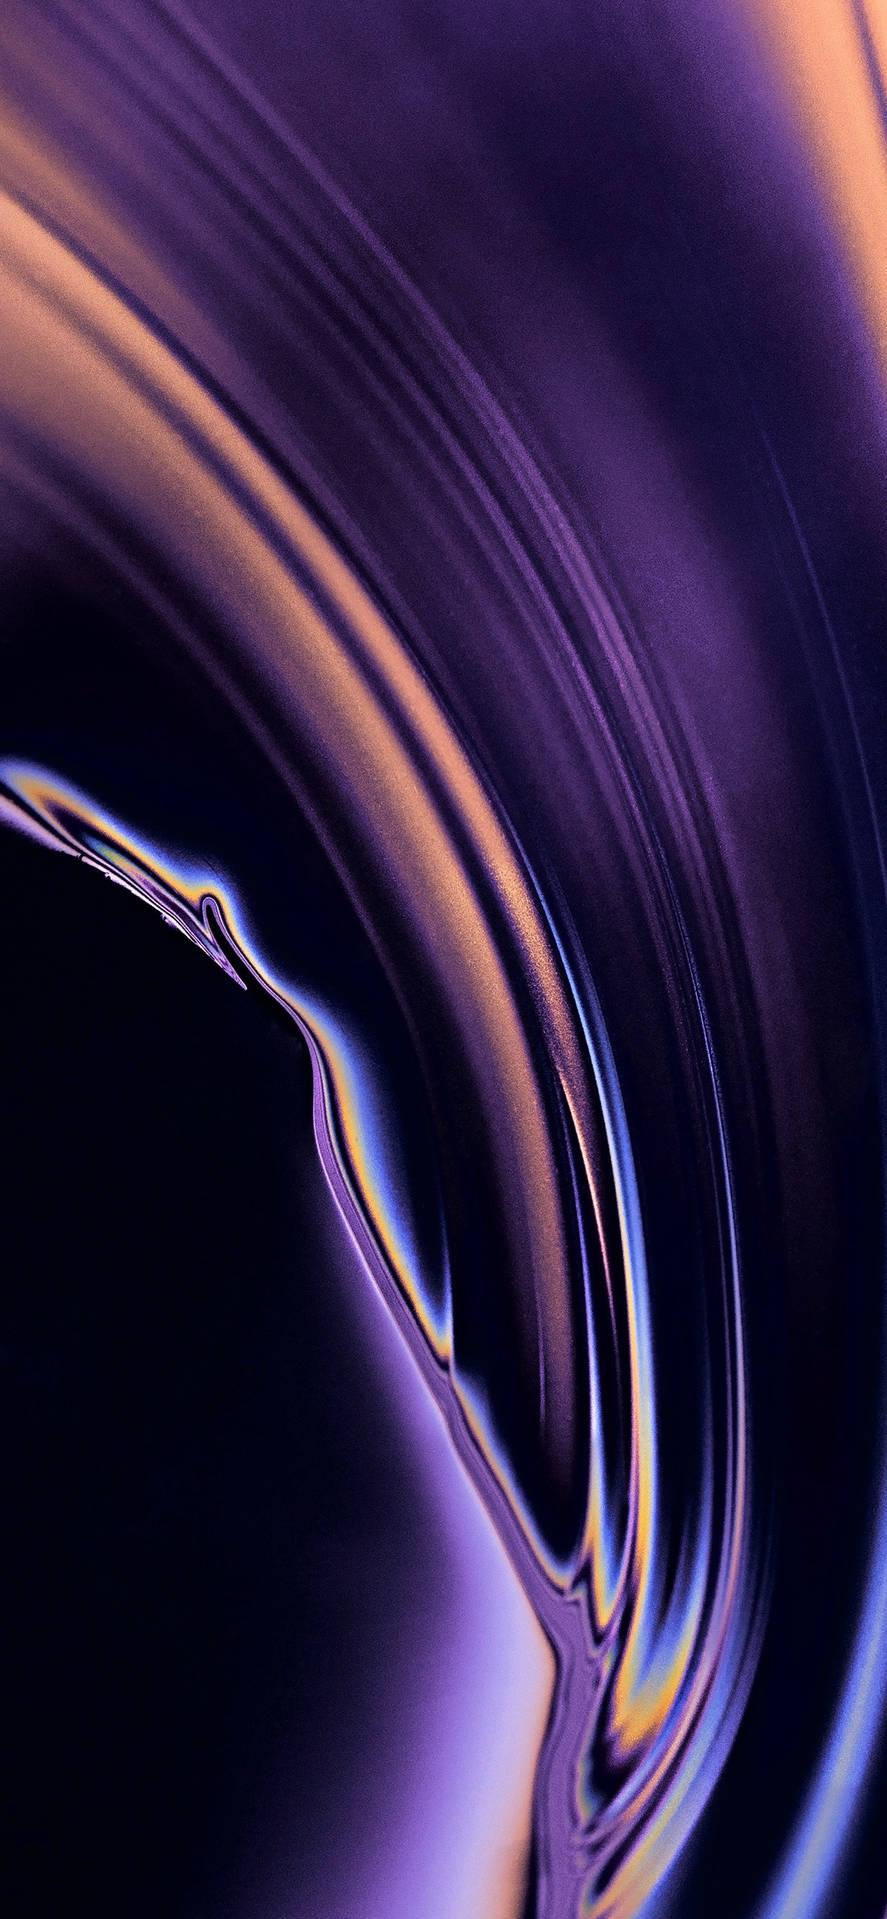 Free download 300] Abstract Iphone Wallpapers [887x1920] for your ...